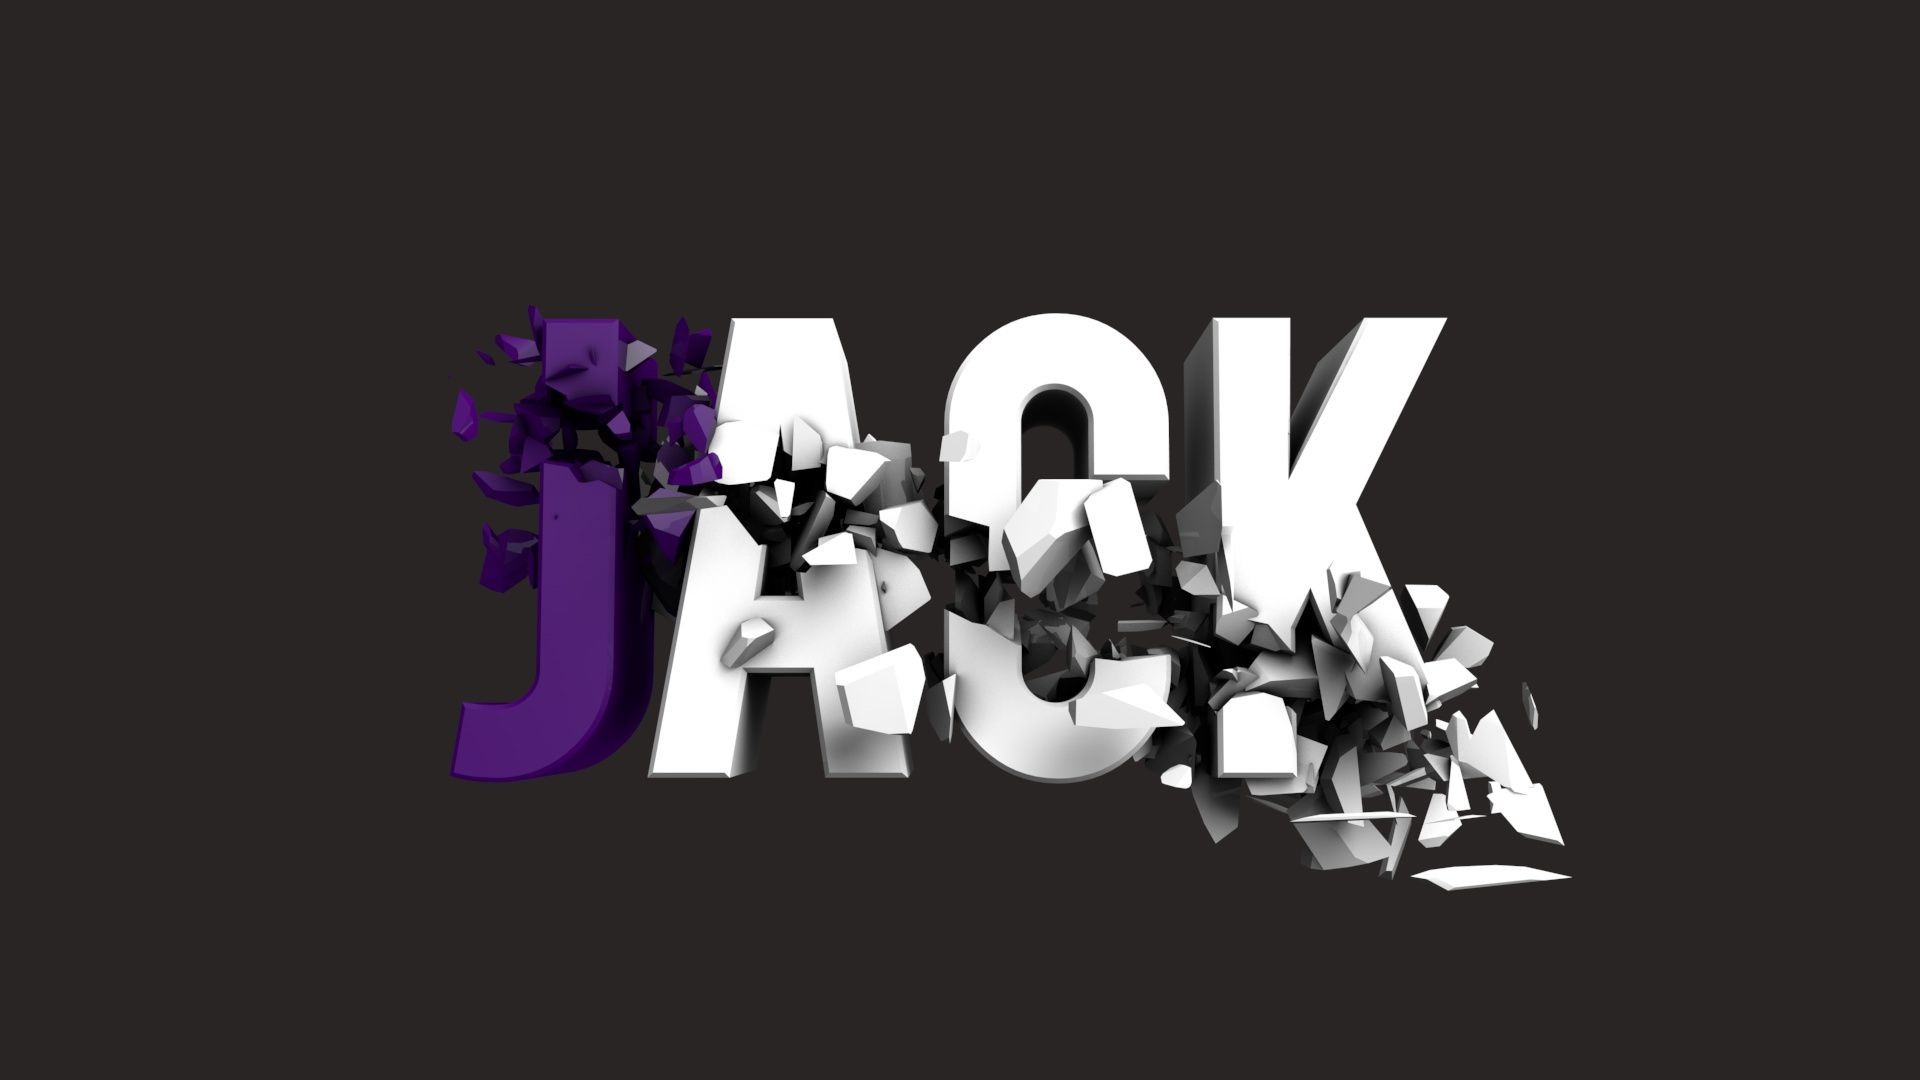 Fancy My Name Logo Free Download 61 On Logo Images - Cool Backgrounds With  The Name Jack - 1920x1080 Wallpaper 